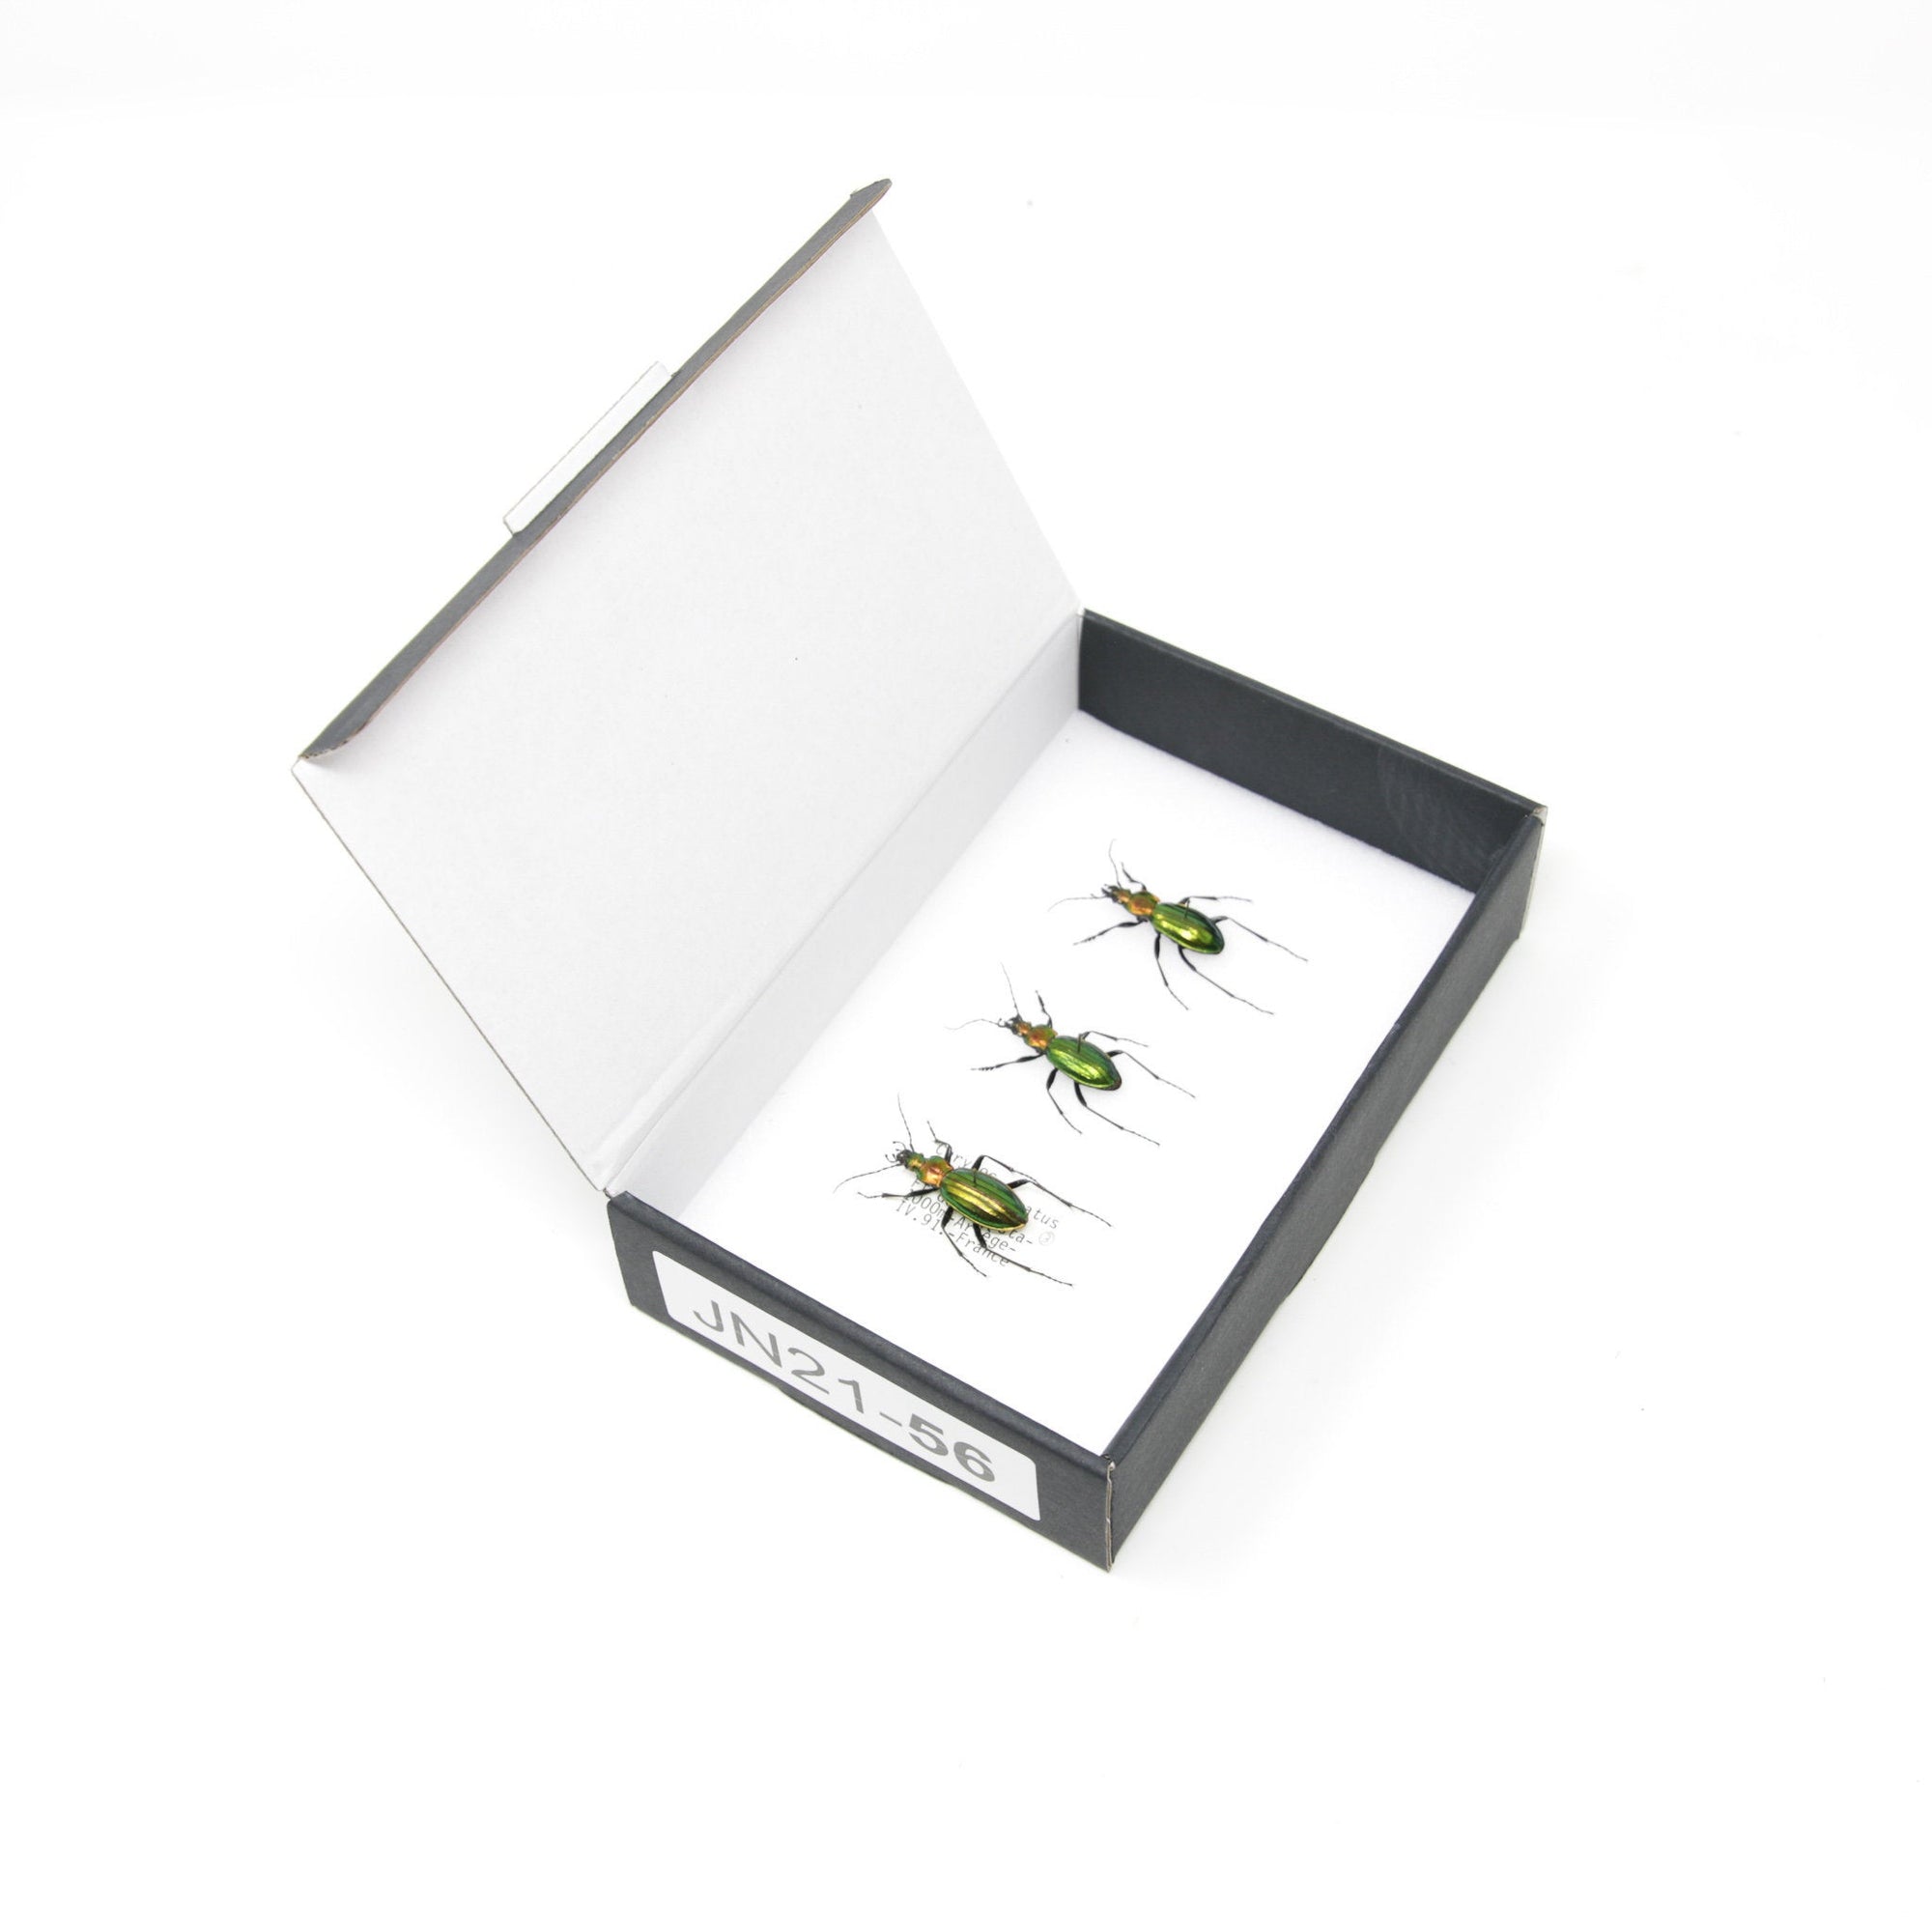 Set of Golden Ground Beetles, Chrysocarabus punctata auratus | Pinned Insect Specimens | Presented in a Gift Box